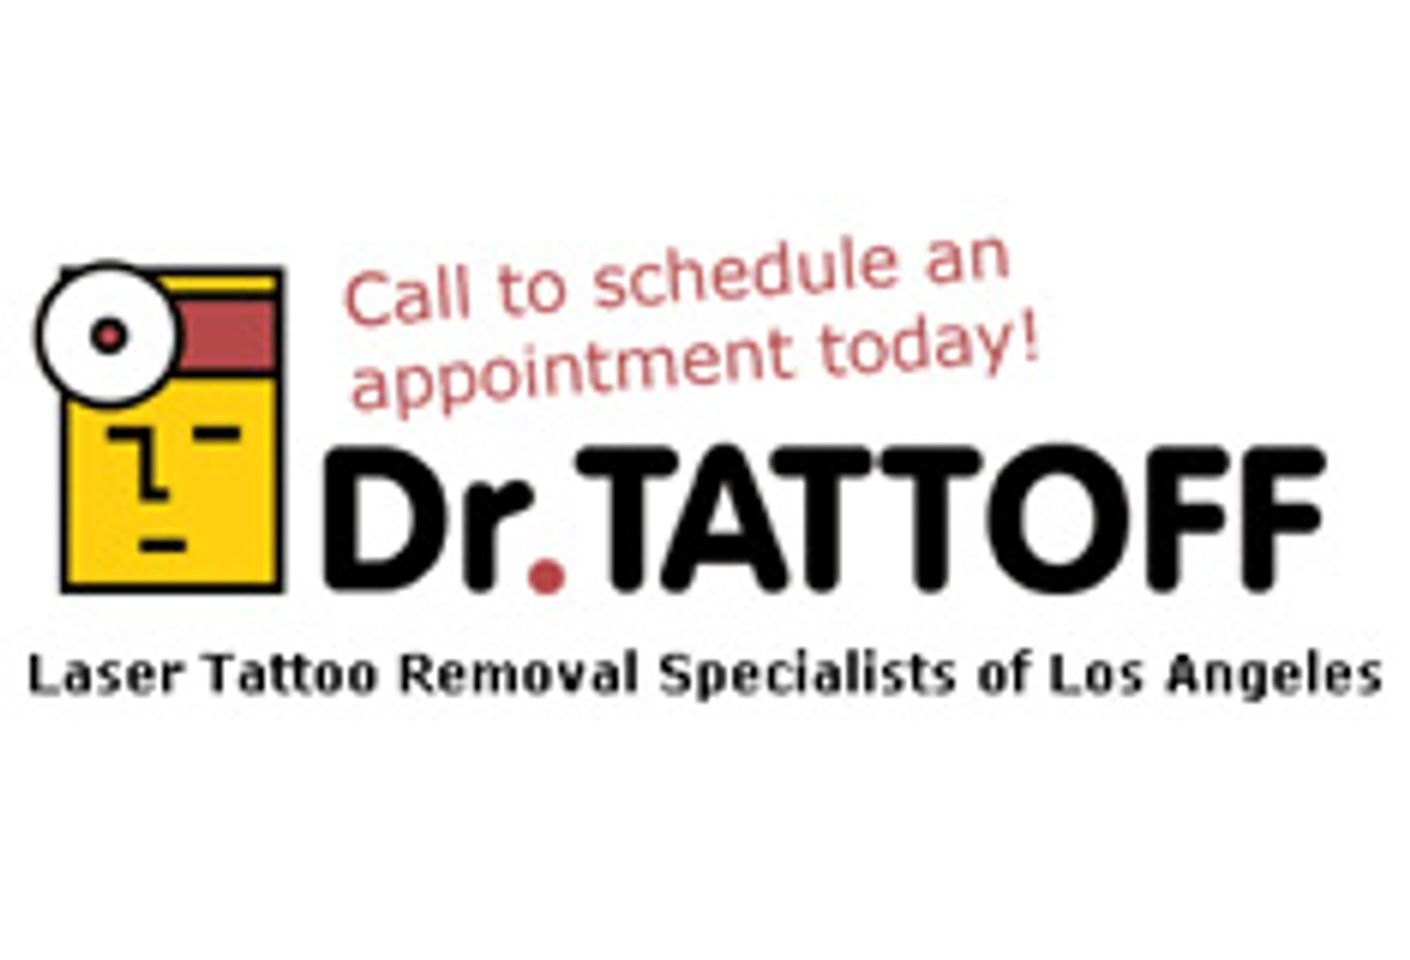 Dr. Tattoff Aims To Help Adult Industry Remove Unwanted Tattoos